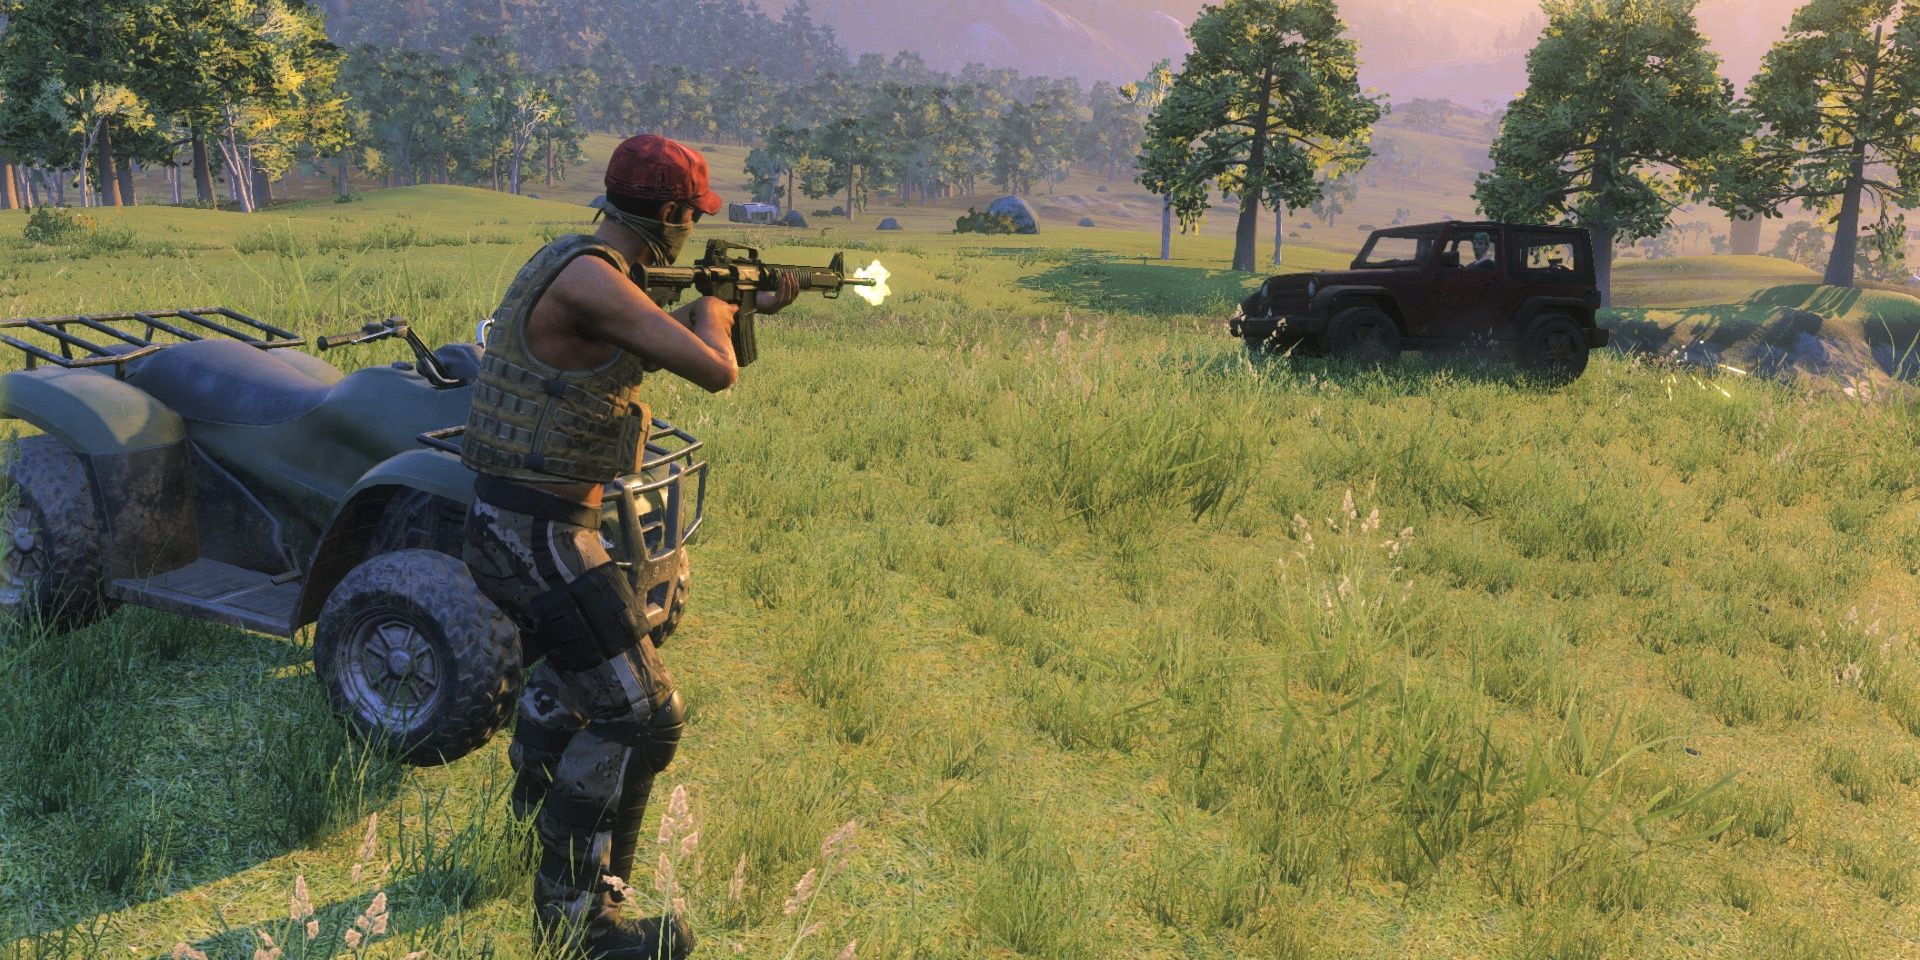 A person shooting at a car in a grassy field in Z1 Battle Royale